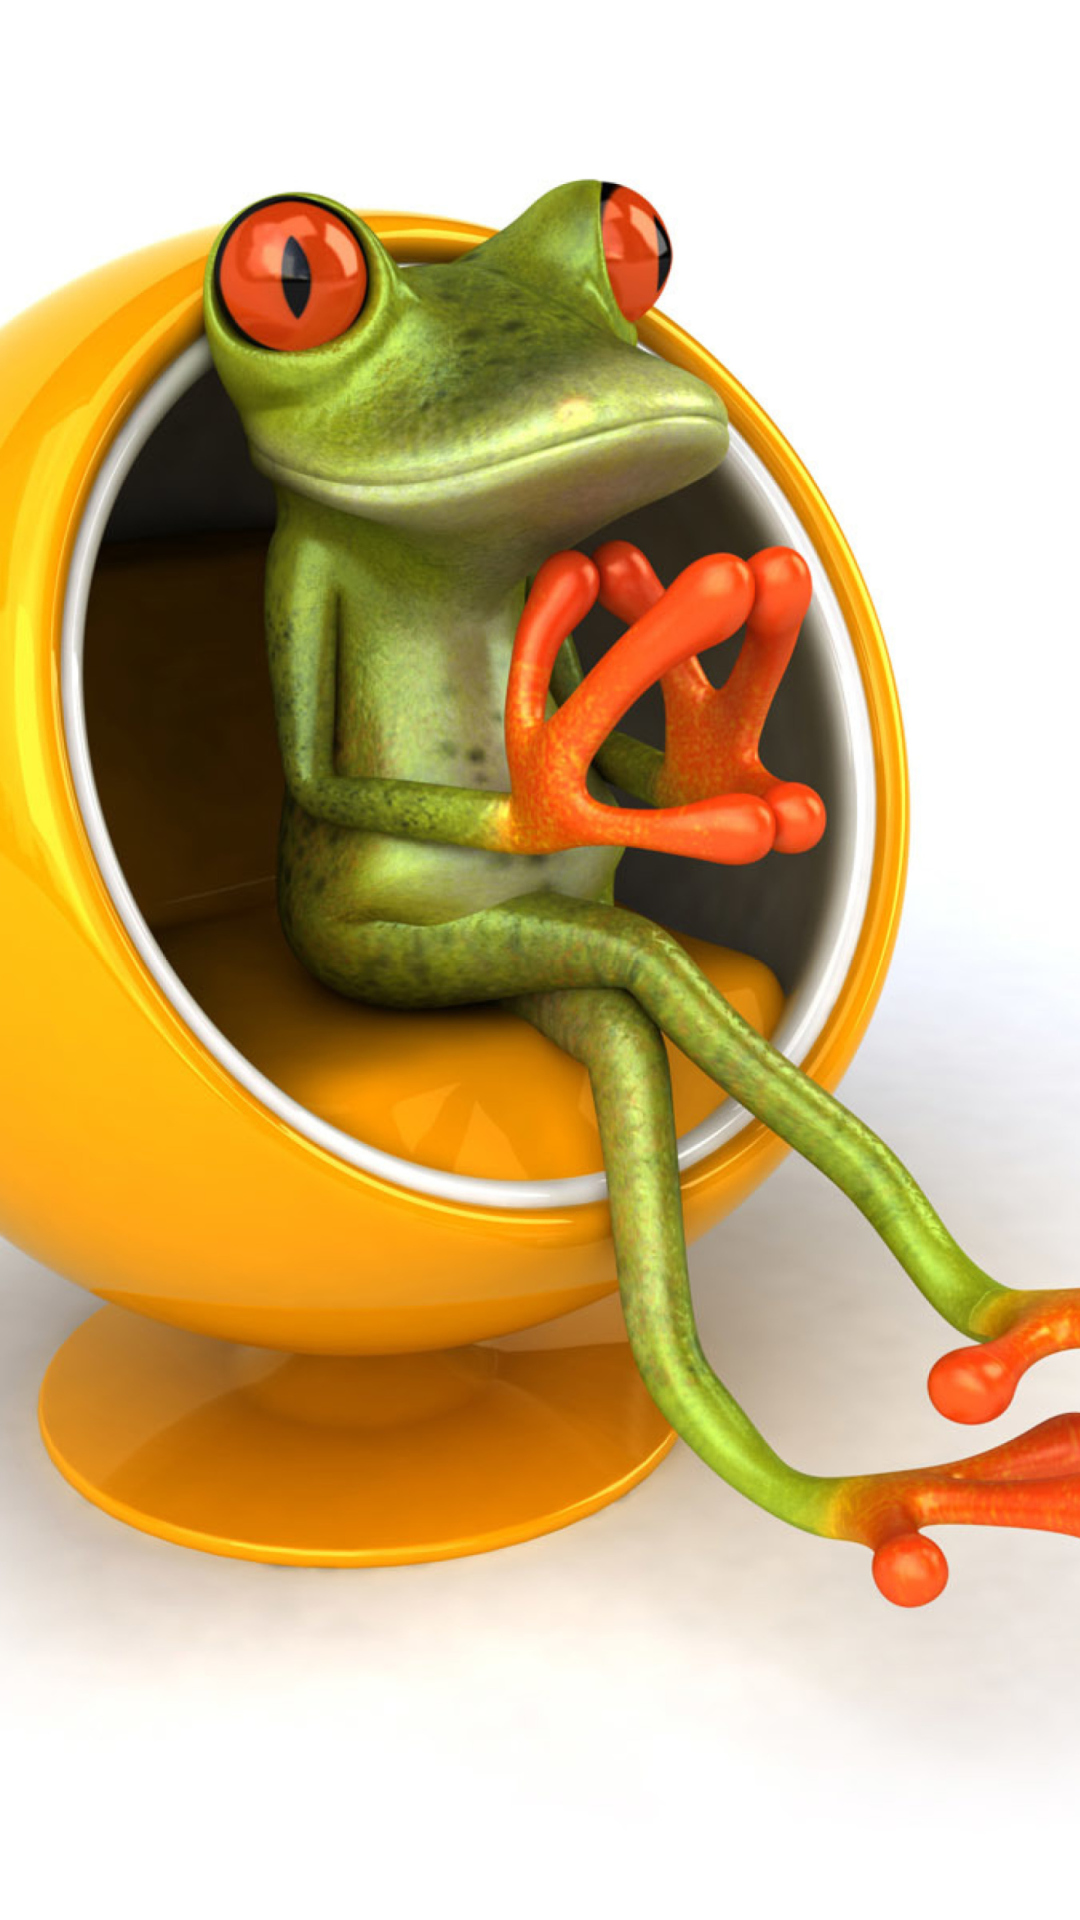 3D Frog On Yellow Chair wallpaper 1080x1920